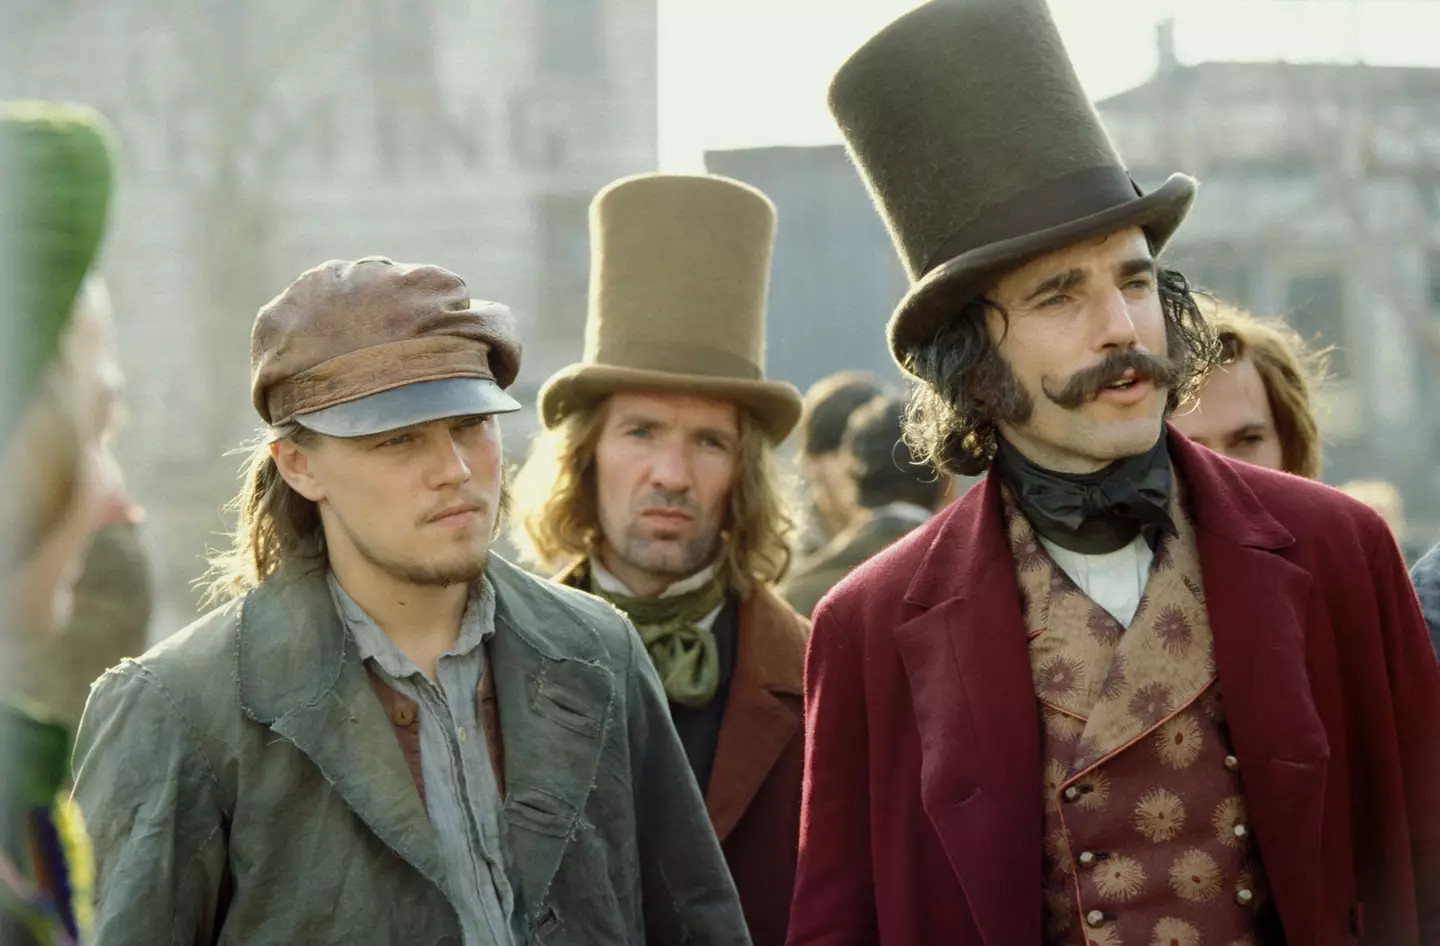 Scorsese and DiCaprio first worked together on Gangs of New York.